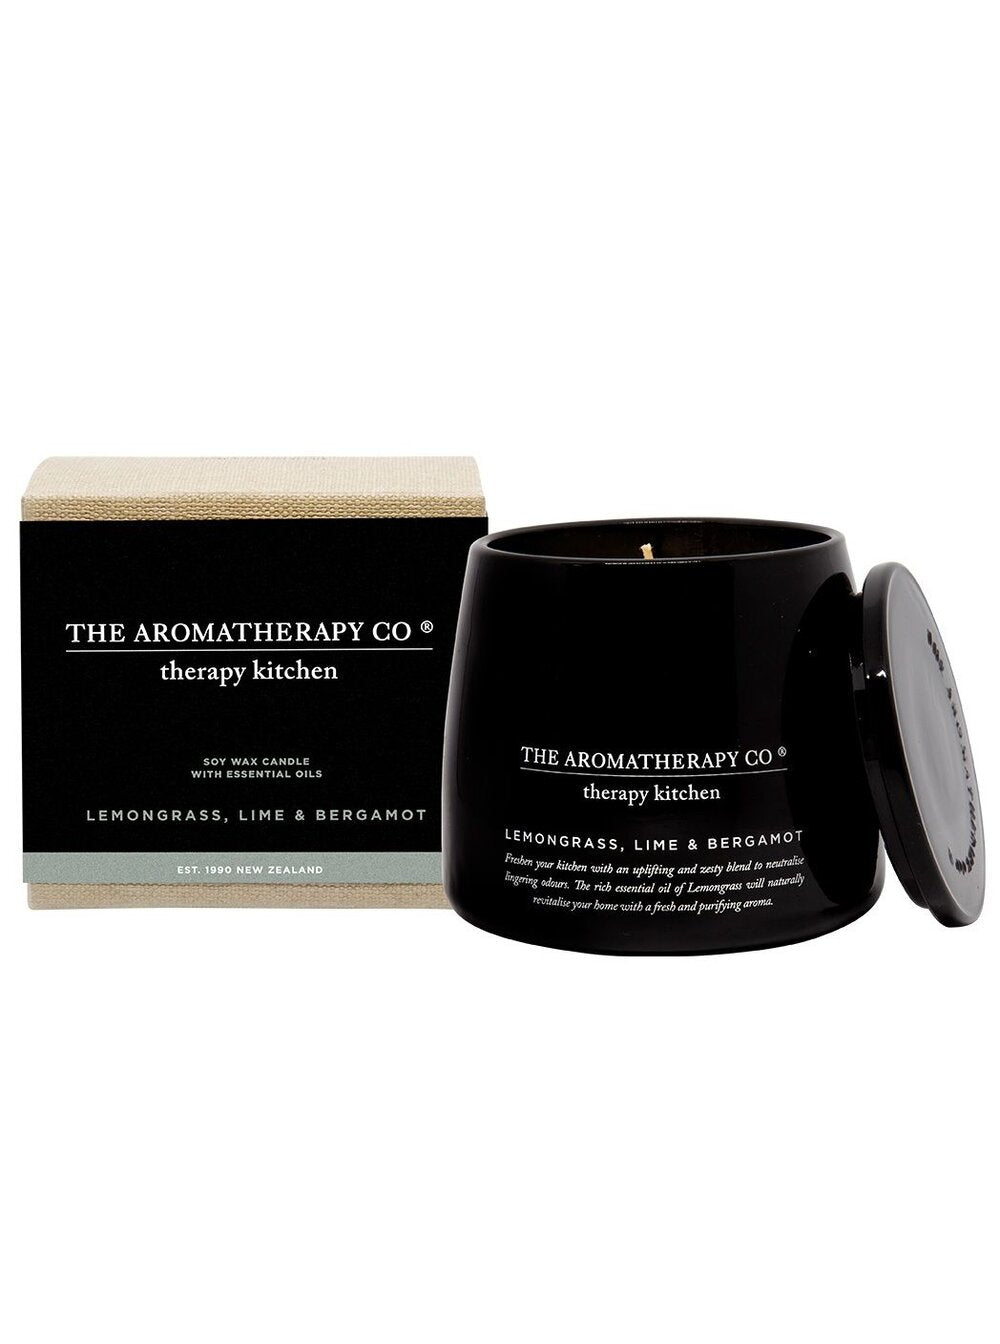 THE AROMATHERAPY CO. THERAPY KITCHEN CANDLE